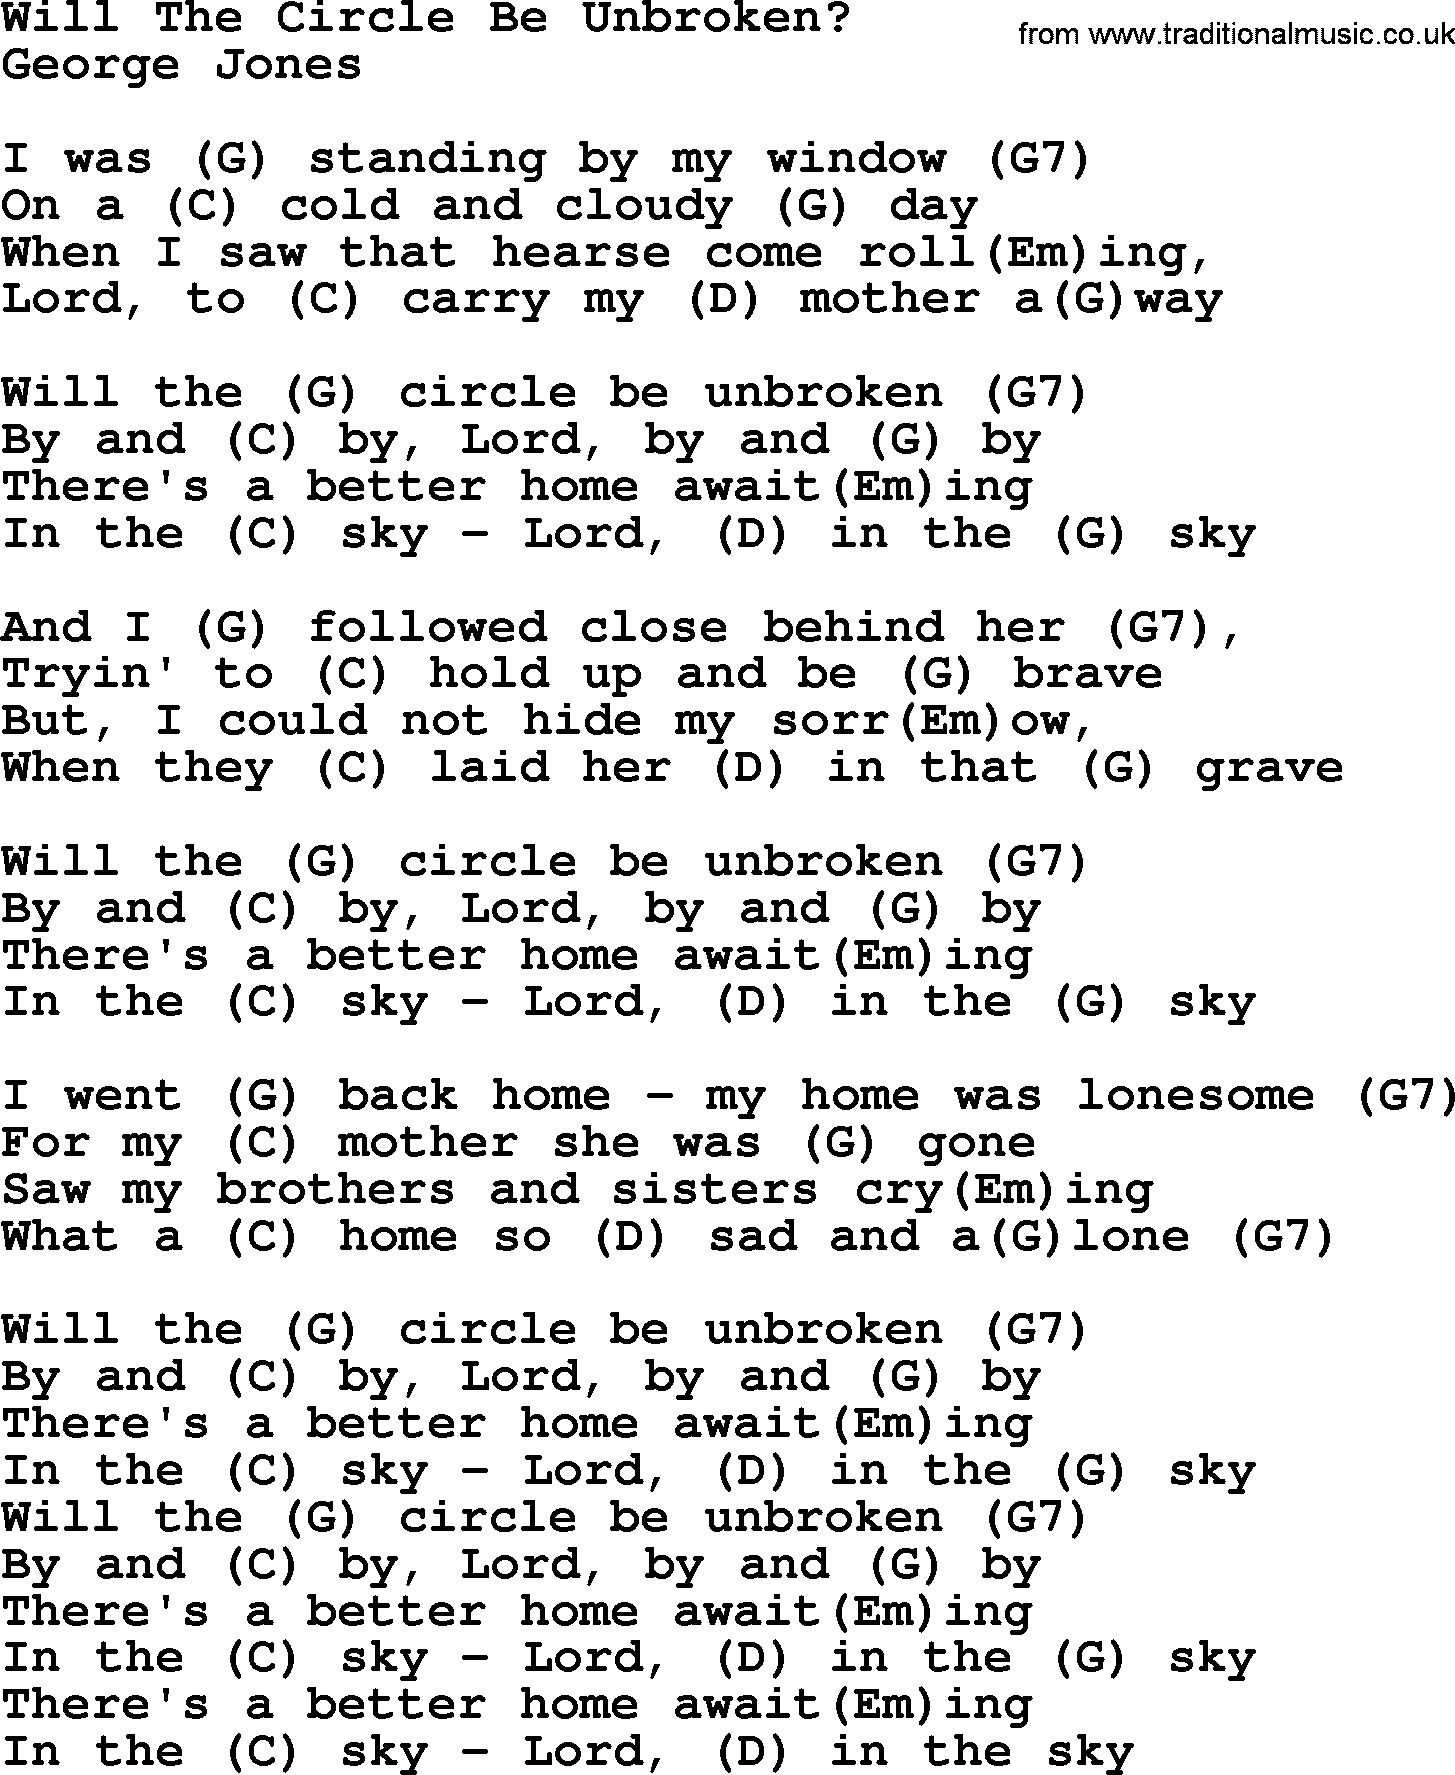 George Jones song: Will The Circle Be Unbroken_, lyrics and chords